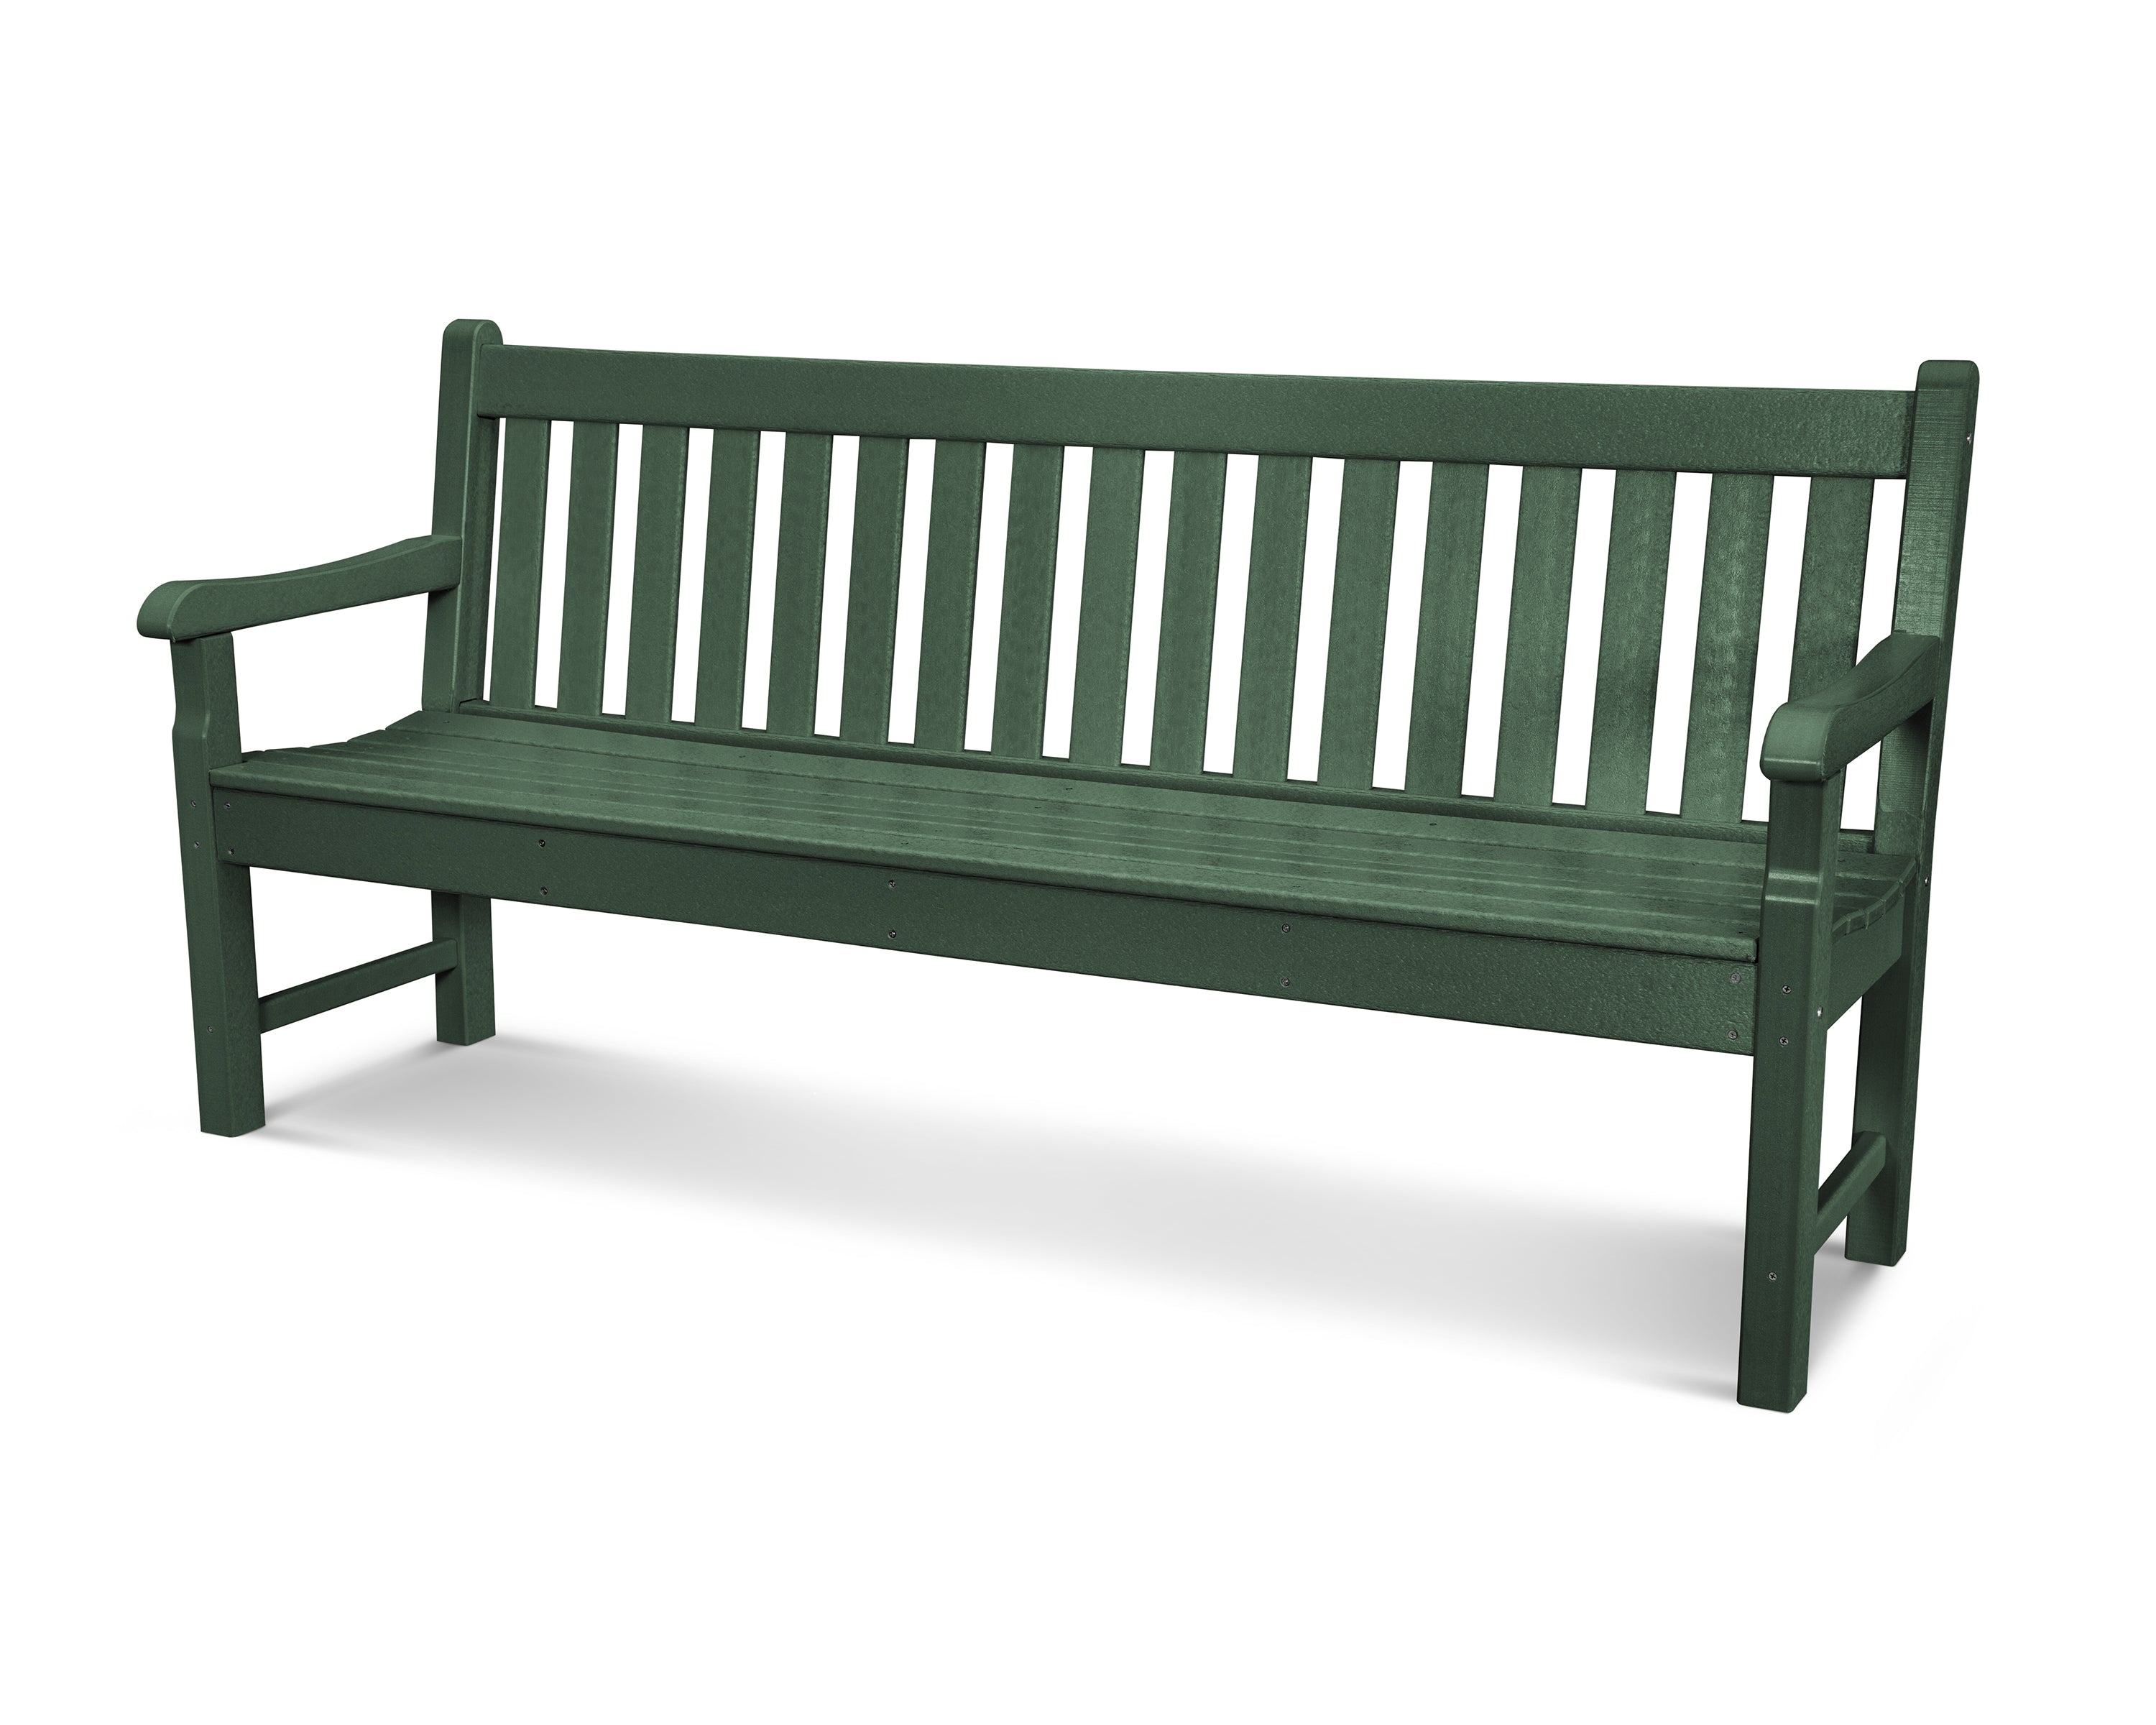 POLYWOOD® Rockford 72" Bench in Green